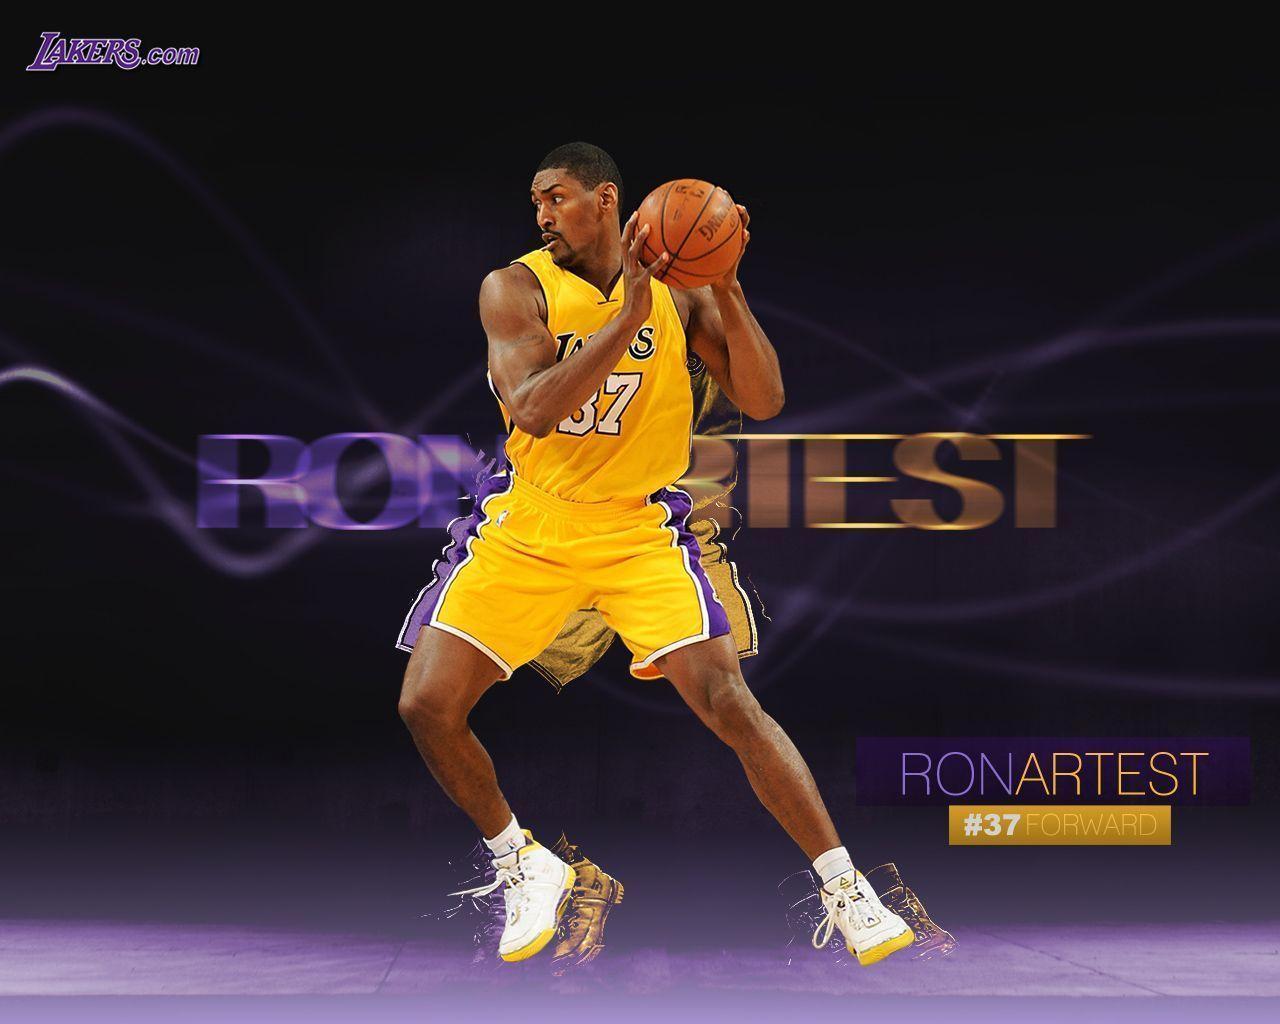 Lakers Desktop Wallpaper 2009 10. THE OFFICIAL SITE OF THE LOS